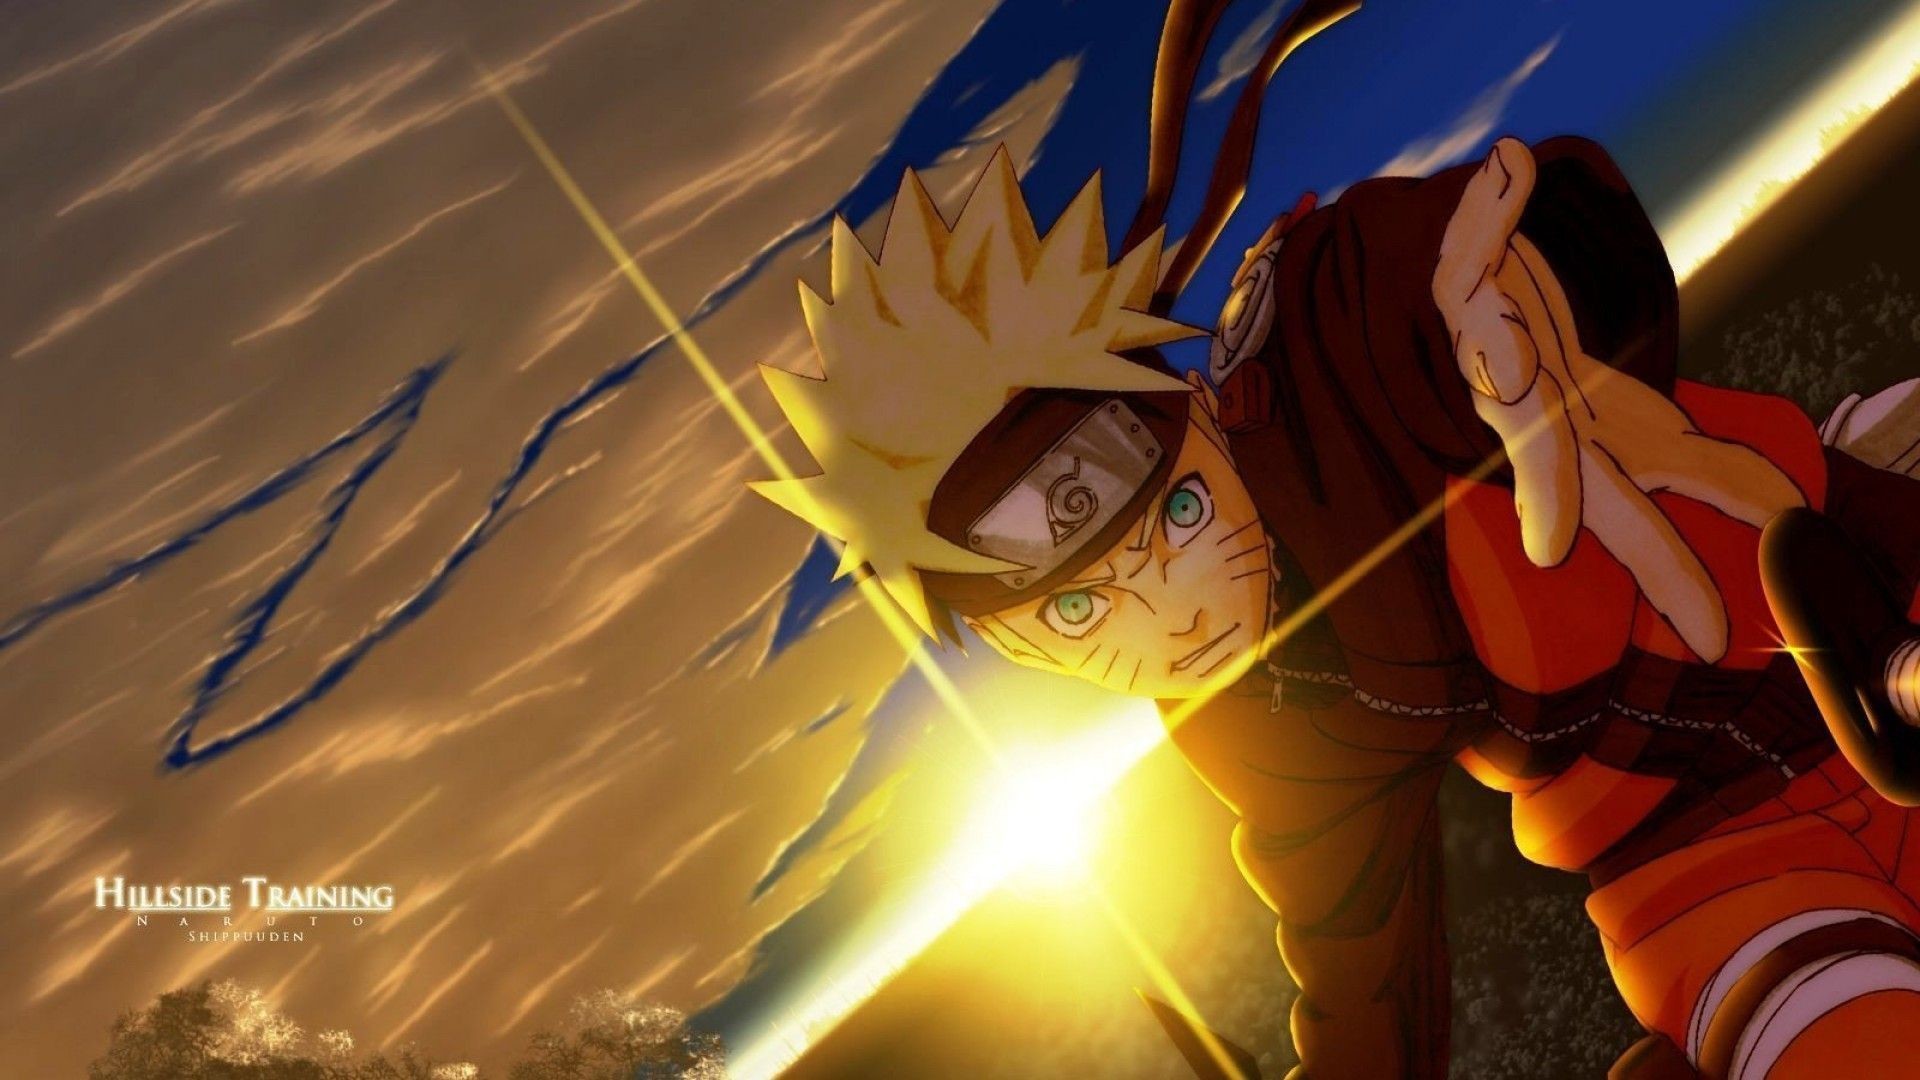 1920x1080 ... Wallpapers group High Definition Creative Naruto Rasengan Pictures ...